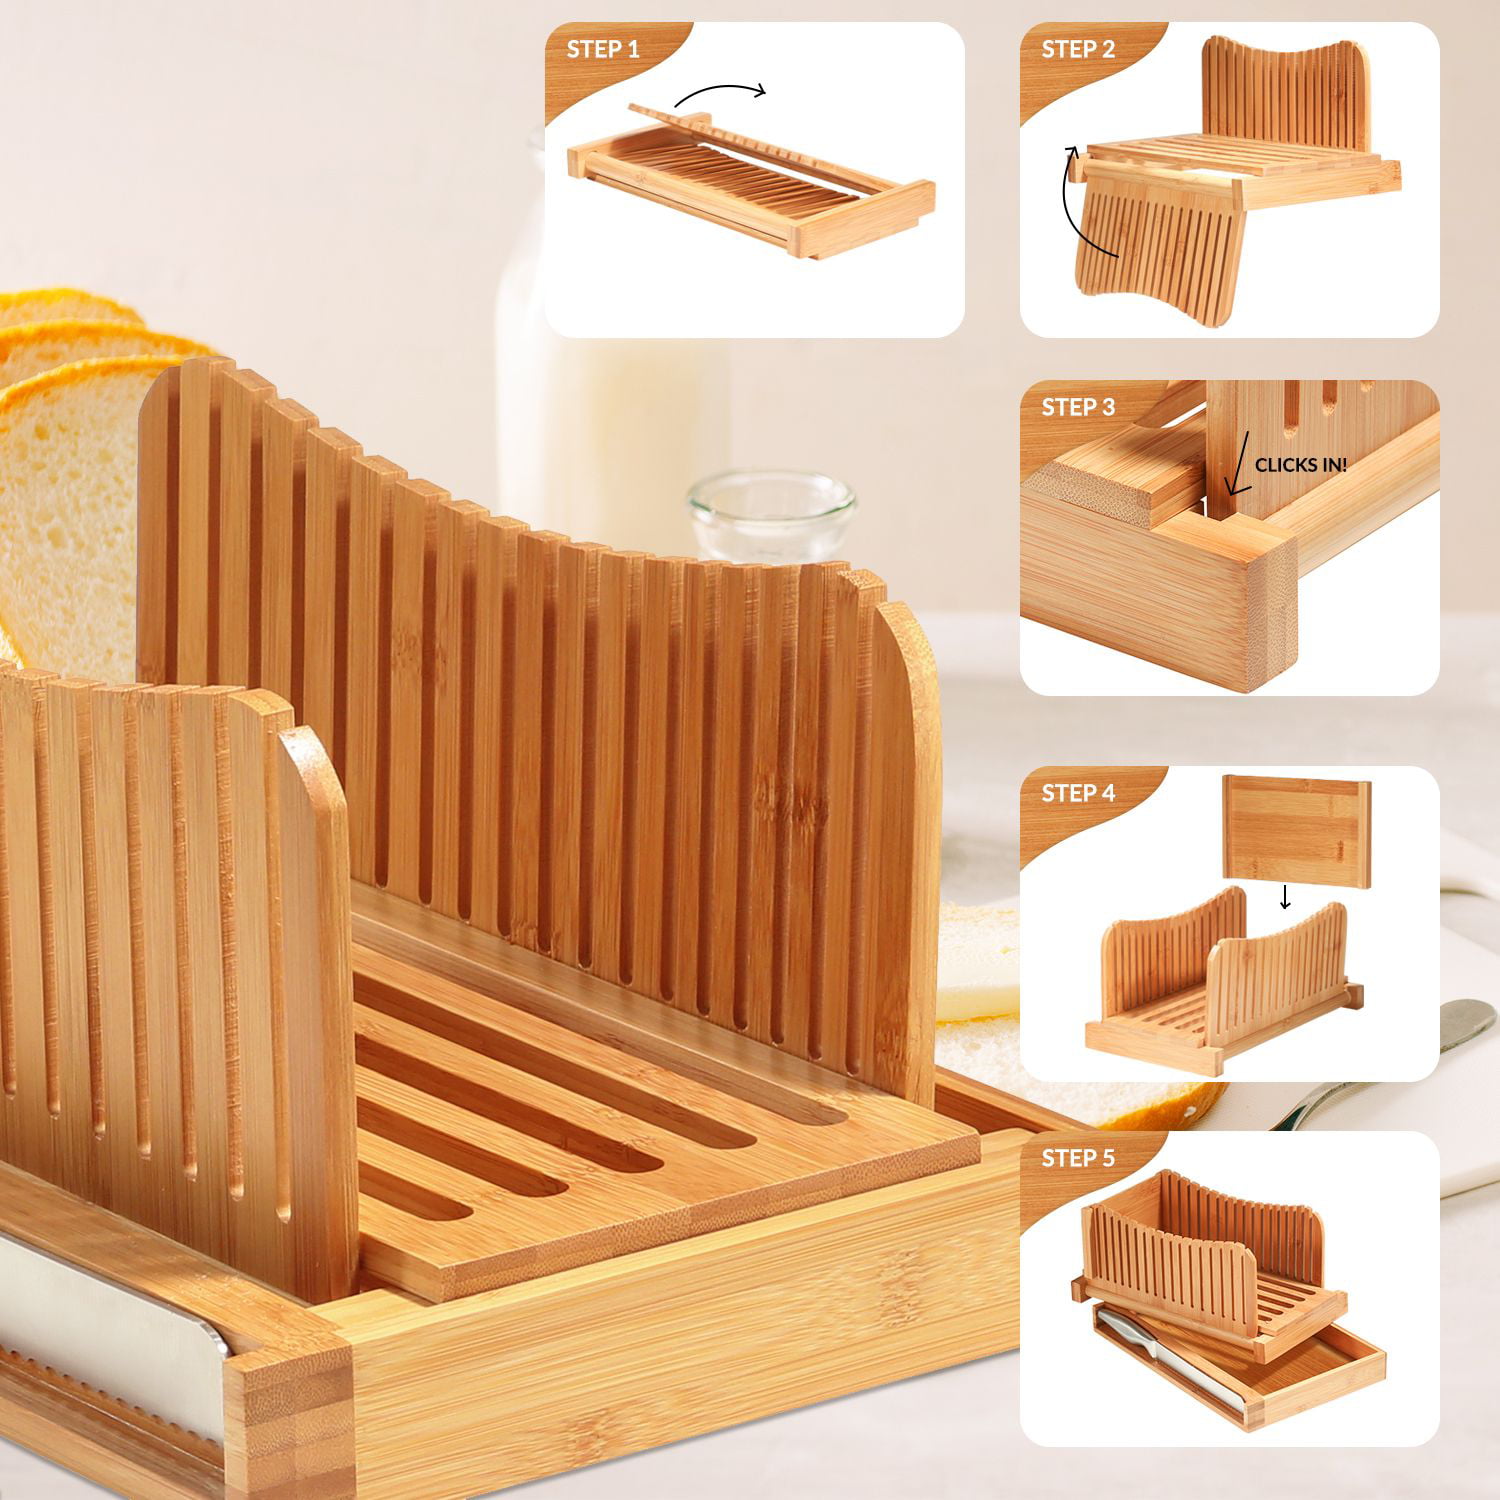 Coolmaded Bamboo Wood Foldable Bread Slicer Compact Bread Slicing Guide  with Crumb Catcher Tray for Homemade Bread Thickness Adjustable 